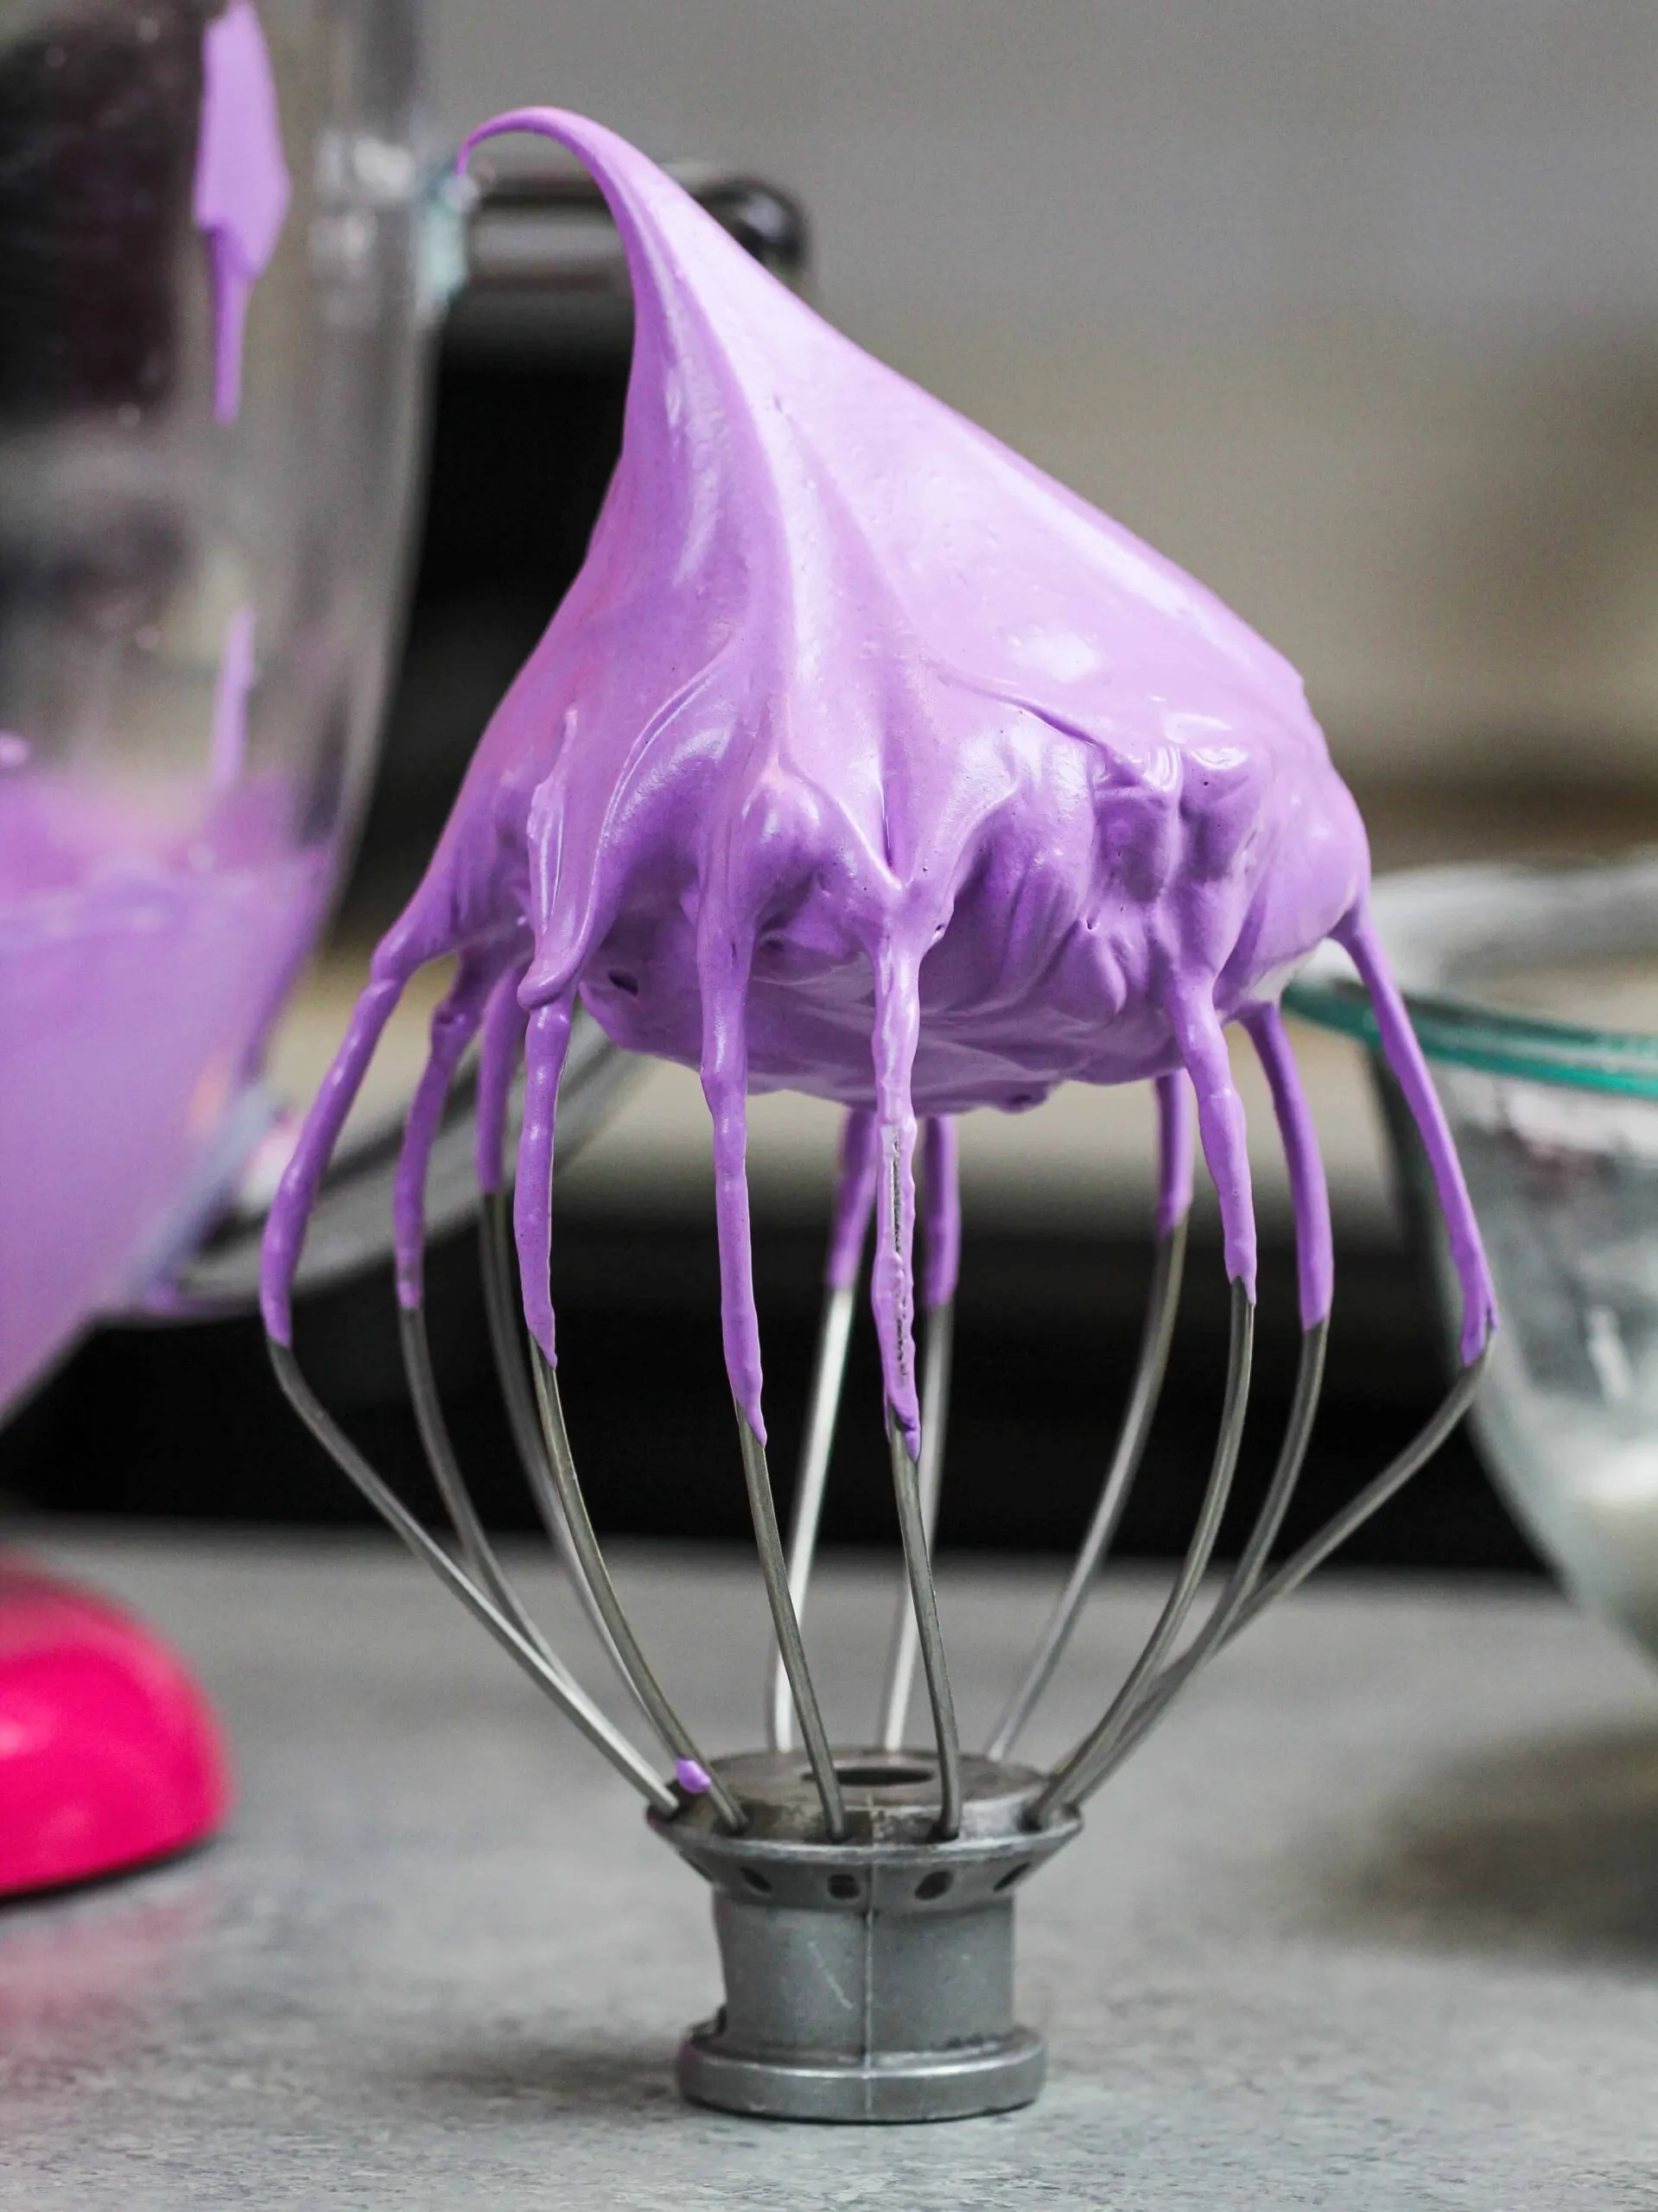 image of french meringue that's been colored purple with gel food coloring to make lavender macarons